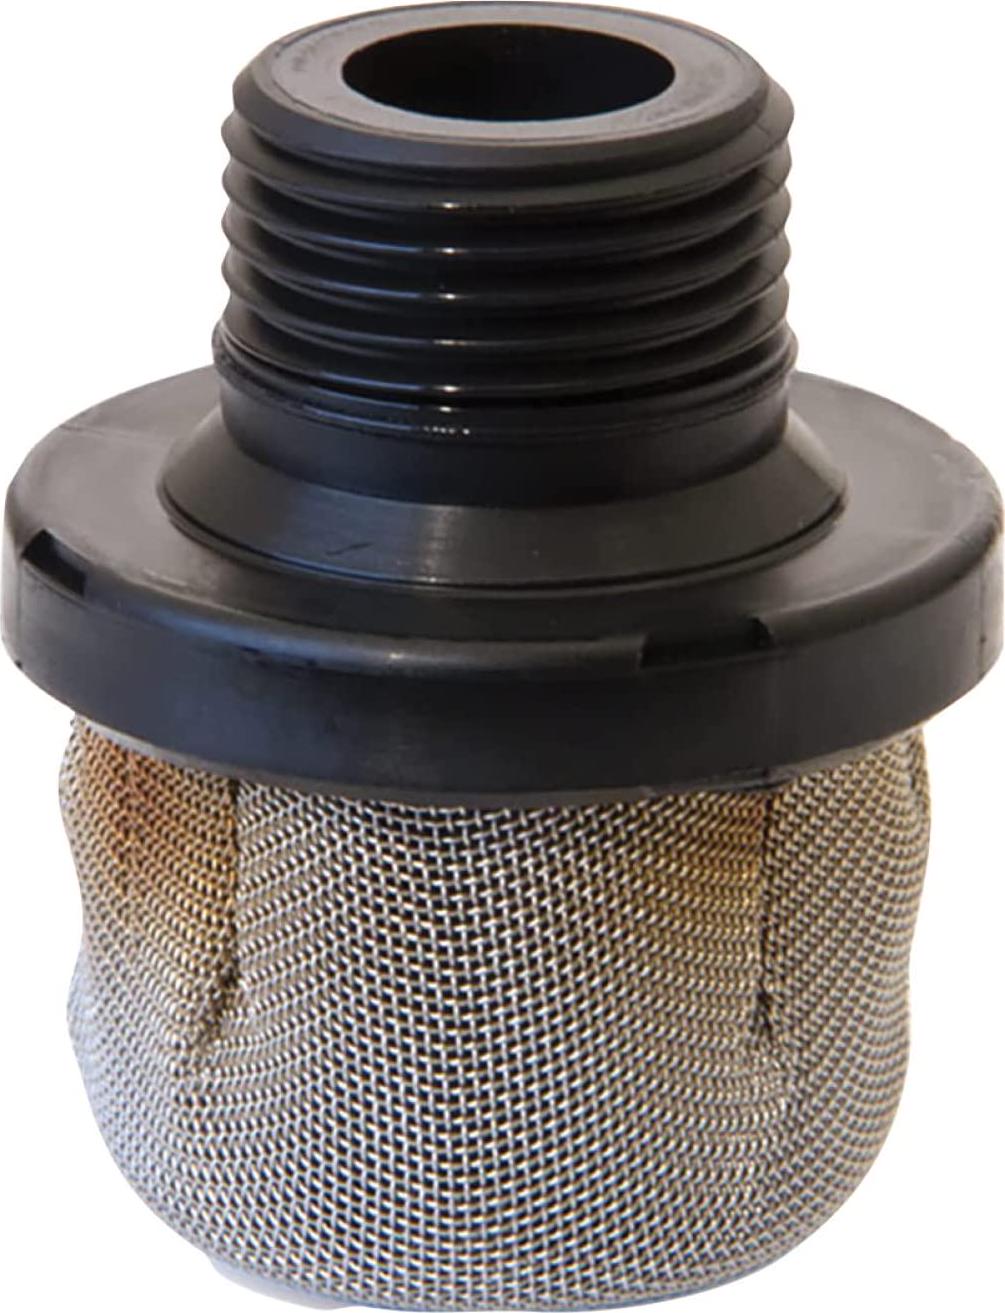 Graco, Graco 288716 Airless Paint Sprayer Replacement Inlet Strainer, 2 cm